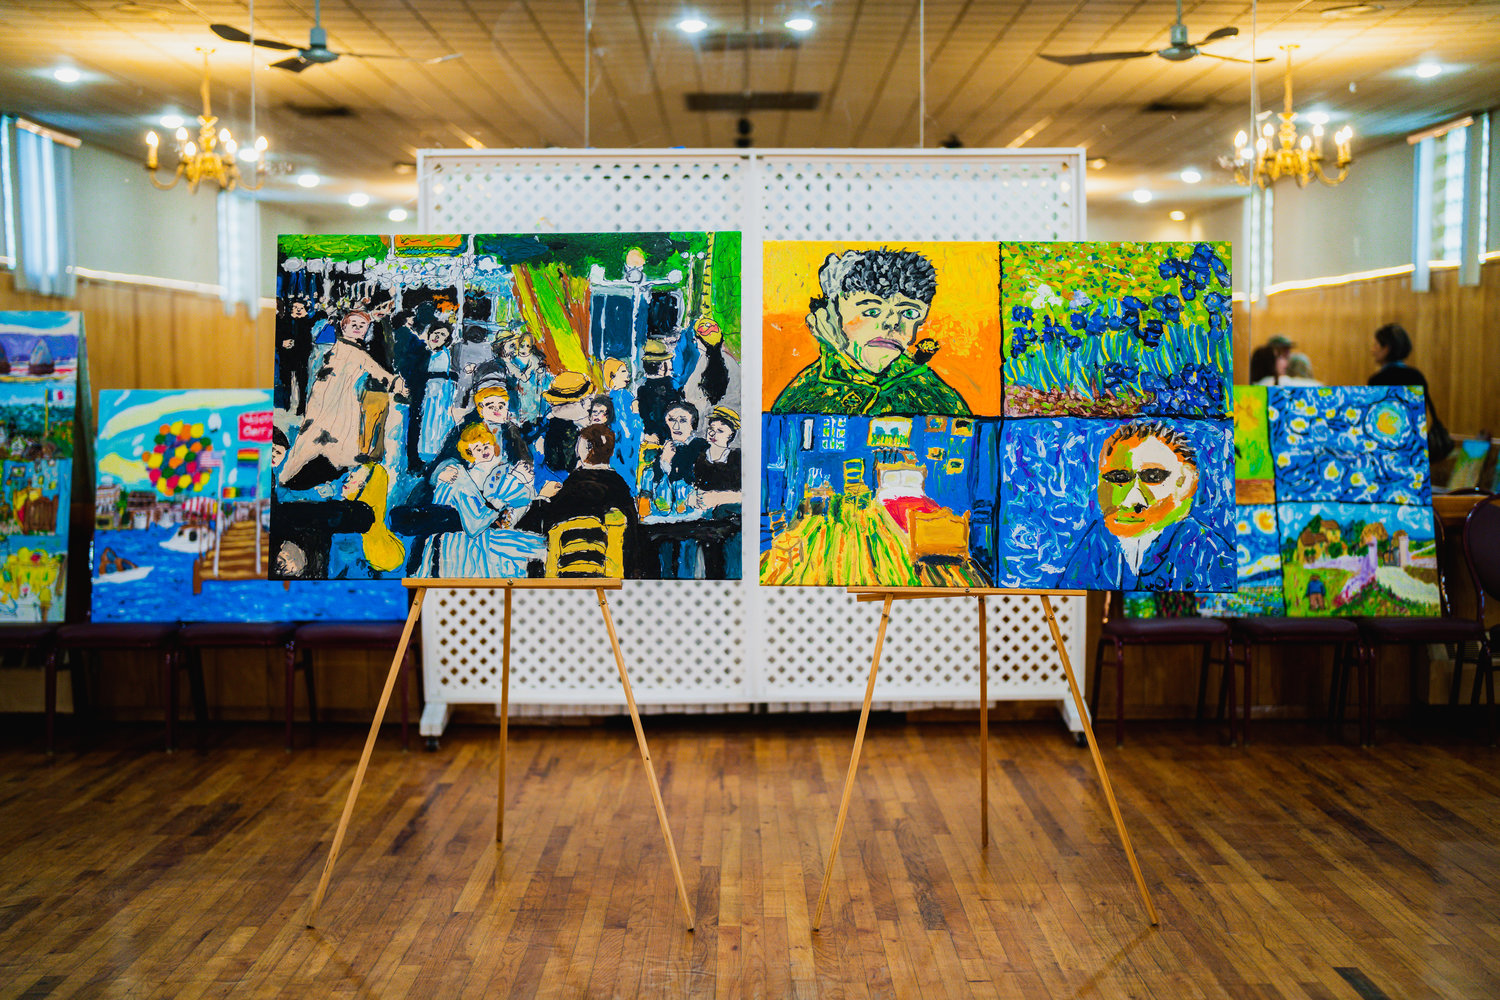 Probative painter, Susan Brown, hosted an art show of her most recent work at the VFW Hall in Sayville. The stunning, contemplative, and playfully reticent pieces lined the edges of the event space.